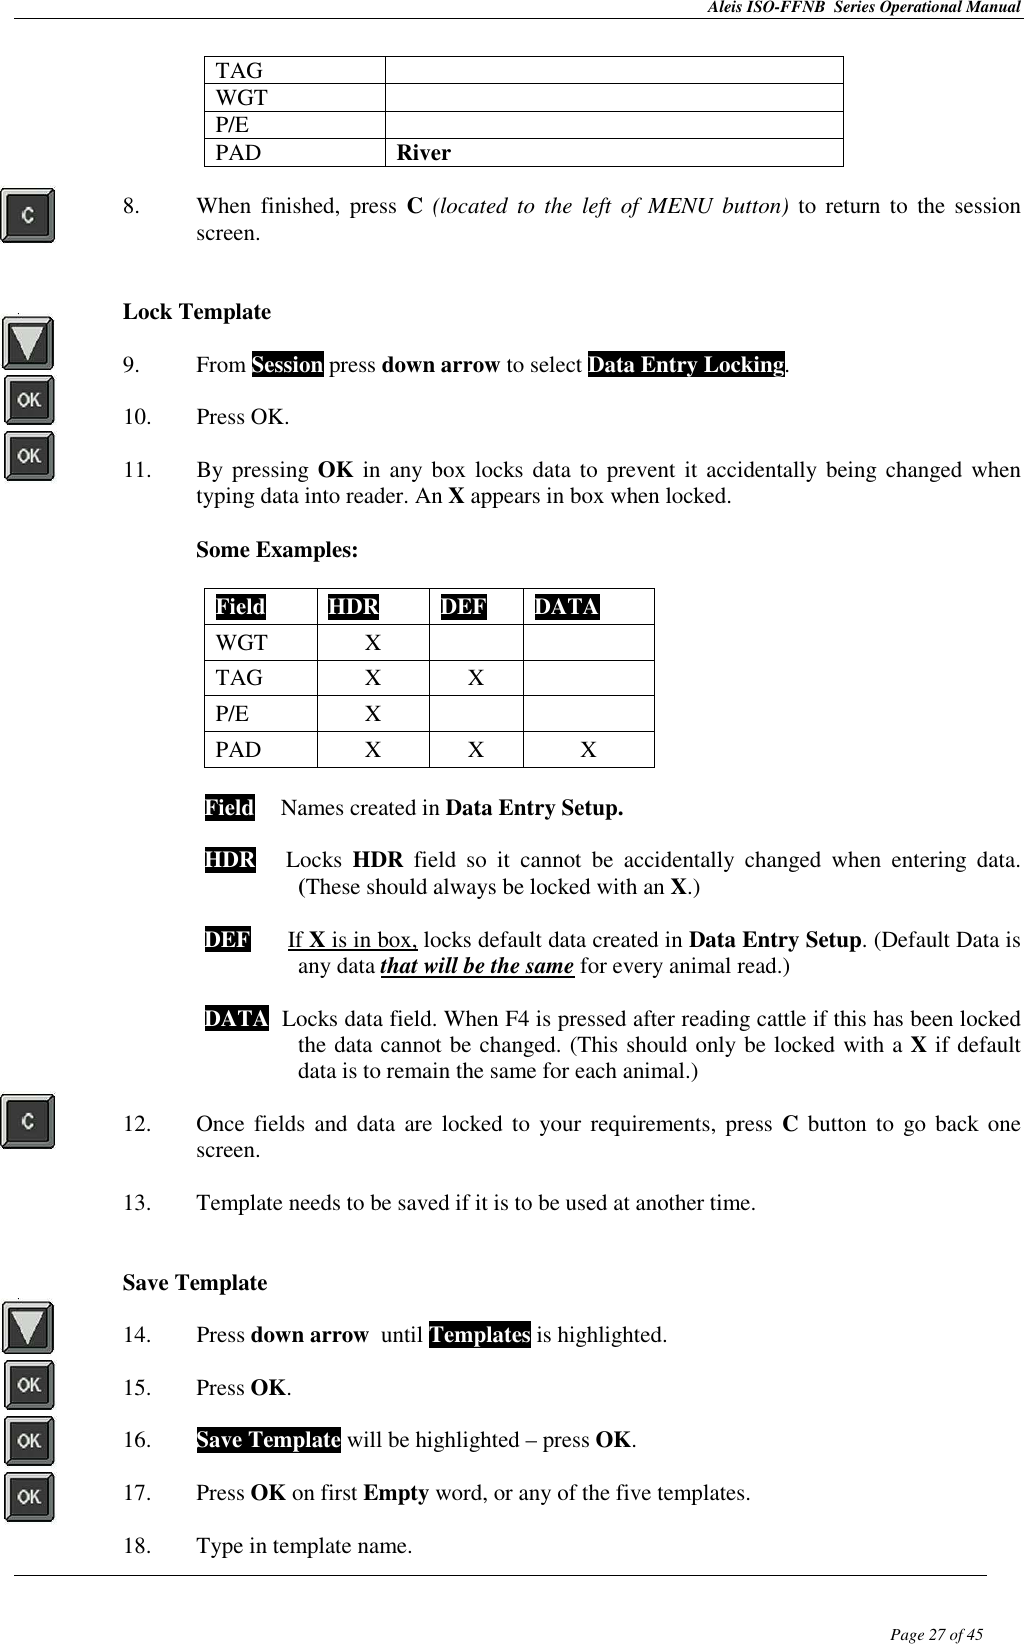 Aleis ISO-FFNB  Series Operational Manual  Page 27 of 45 TAG   WGT   P/E   PAD  River  8. When  finished,  press  C (located  to  the  left of MENU  button)  to  return to  the  session screen.   Lock Template  9. From Session press down arrow to select Data Entry Locking.  10. Press OK.  11. By pressing OK in  any box  locks data to  prevent it accidentally being changed  when typing data into reader. An X appears in box when locked.   Some Examples:  Field  HDR  DEF  DATA WGT  X   TAG  X  X   P/E  X   PAD  X  X  X  Field  TNames created in Data Entry Setup.  HDR      Locks  HDR  field  so  it  cannot  be  accidentally  changed  when  entering  data.   (These should always be locked with an X.) This sho DEF      If X is in box, locks default data created in Data Entry Setup. (Default Data is   any data that will be the same for every animal read.)   DATA  Locks data field. When F4 is pressed after reading cattle if this has been locked the data cannot be changed. (This should only be locked with a X if default data is to remain the same for each animal.)  12. Once  fields  and data  are locked  to your  requirements, press C  button  to go  back one screen.  13. Template needs to be saved if it is to be used at another time.   Save Template  14. Press down arrow  until Templates is highlighted.  15. Press OK.  16. Save Template will be highlighted – press OK.  17. Press OK on first Empty word, or any of the five templates.  18. Type in template name. 